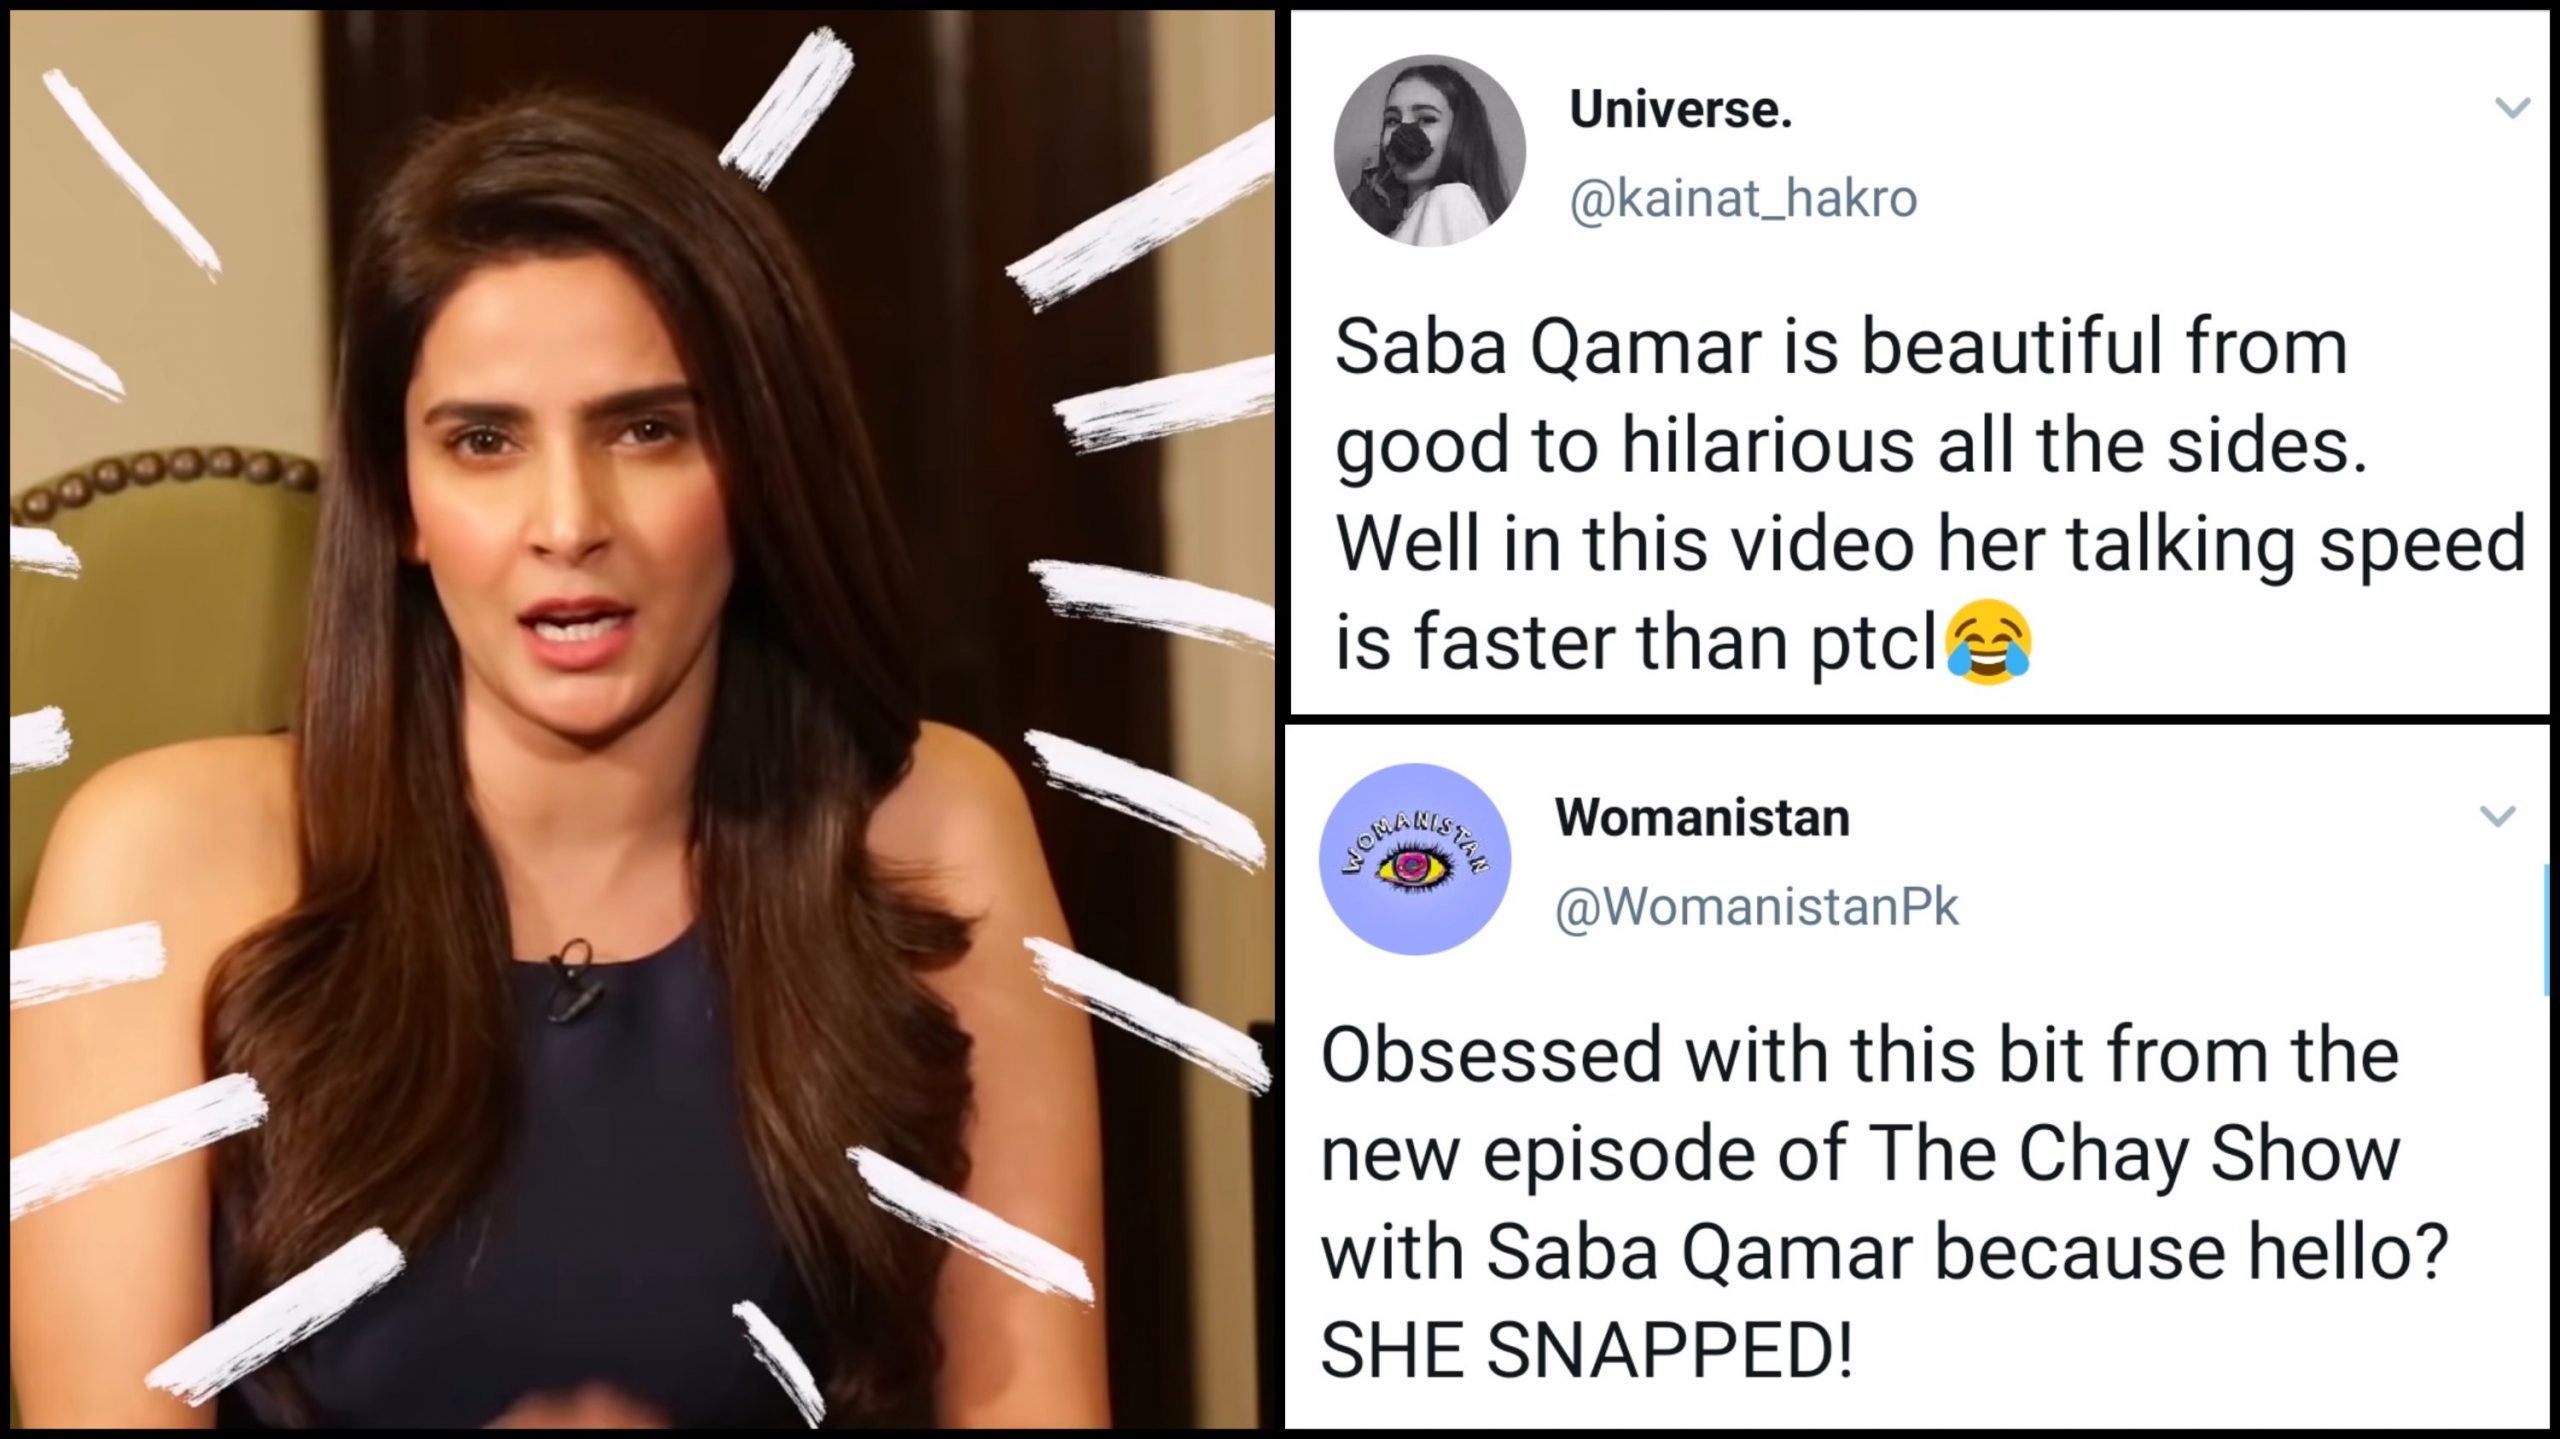 Saba Qamar Is The Queen Of Savage & The Internet Agrees! - Diva Magazine